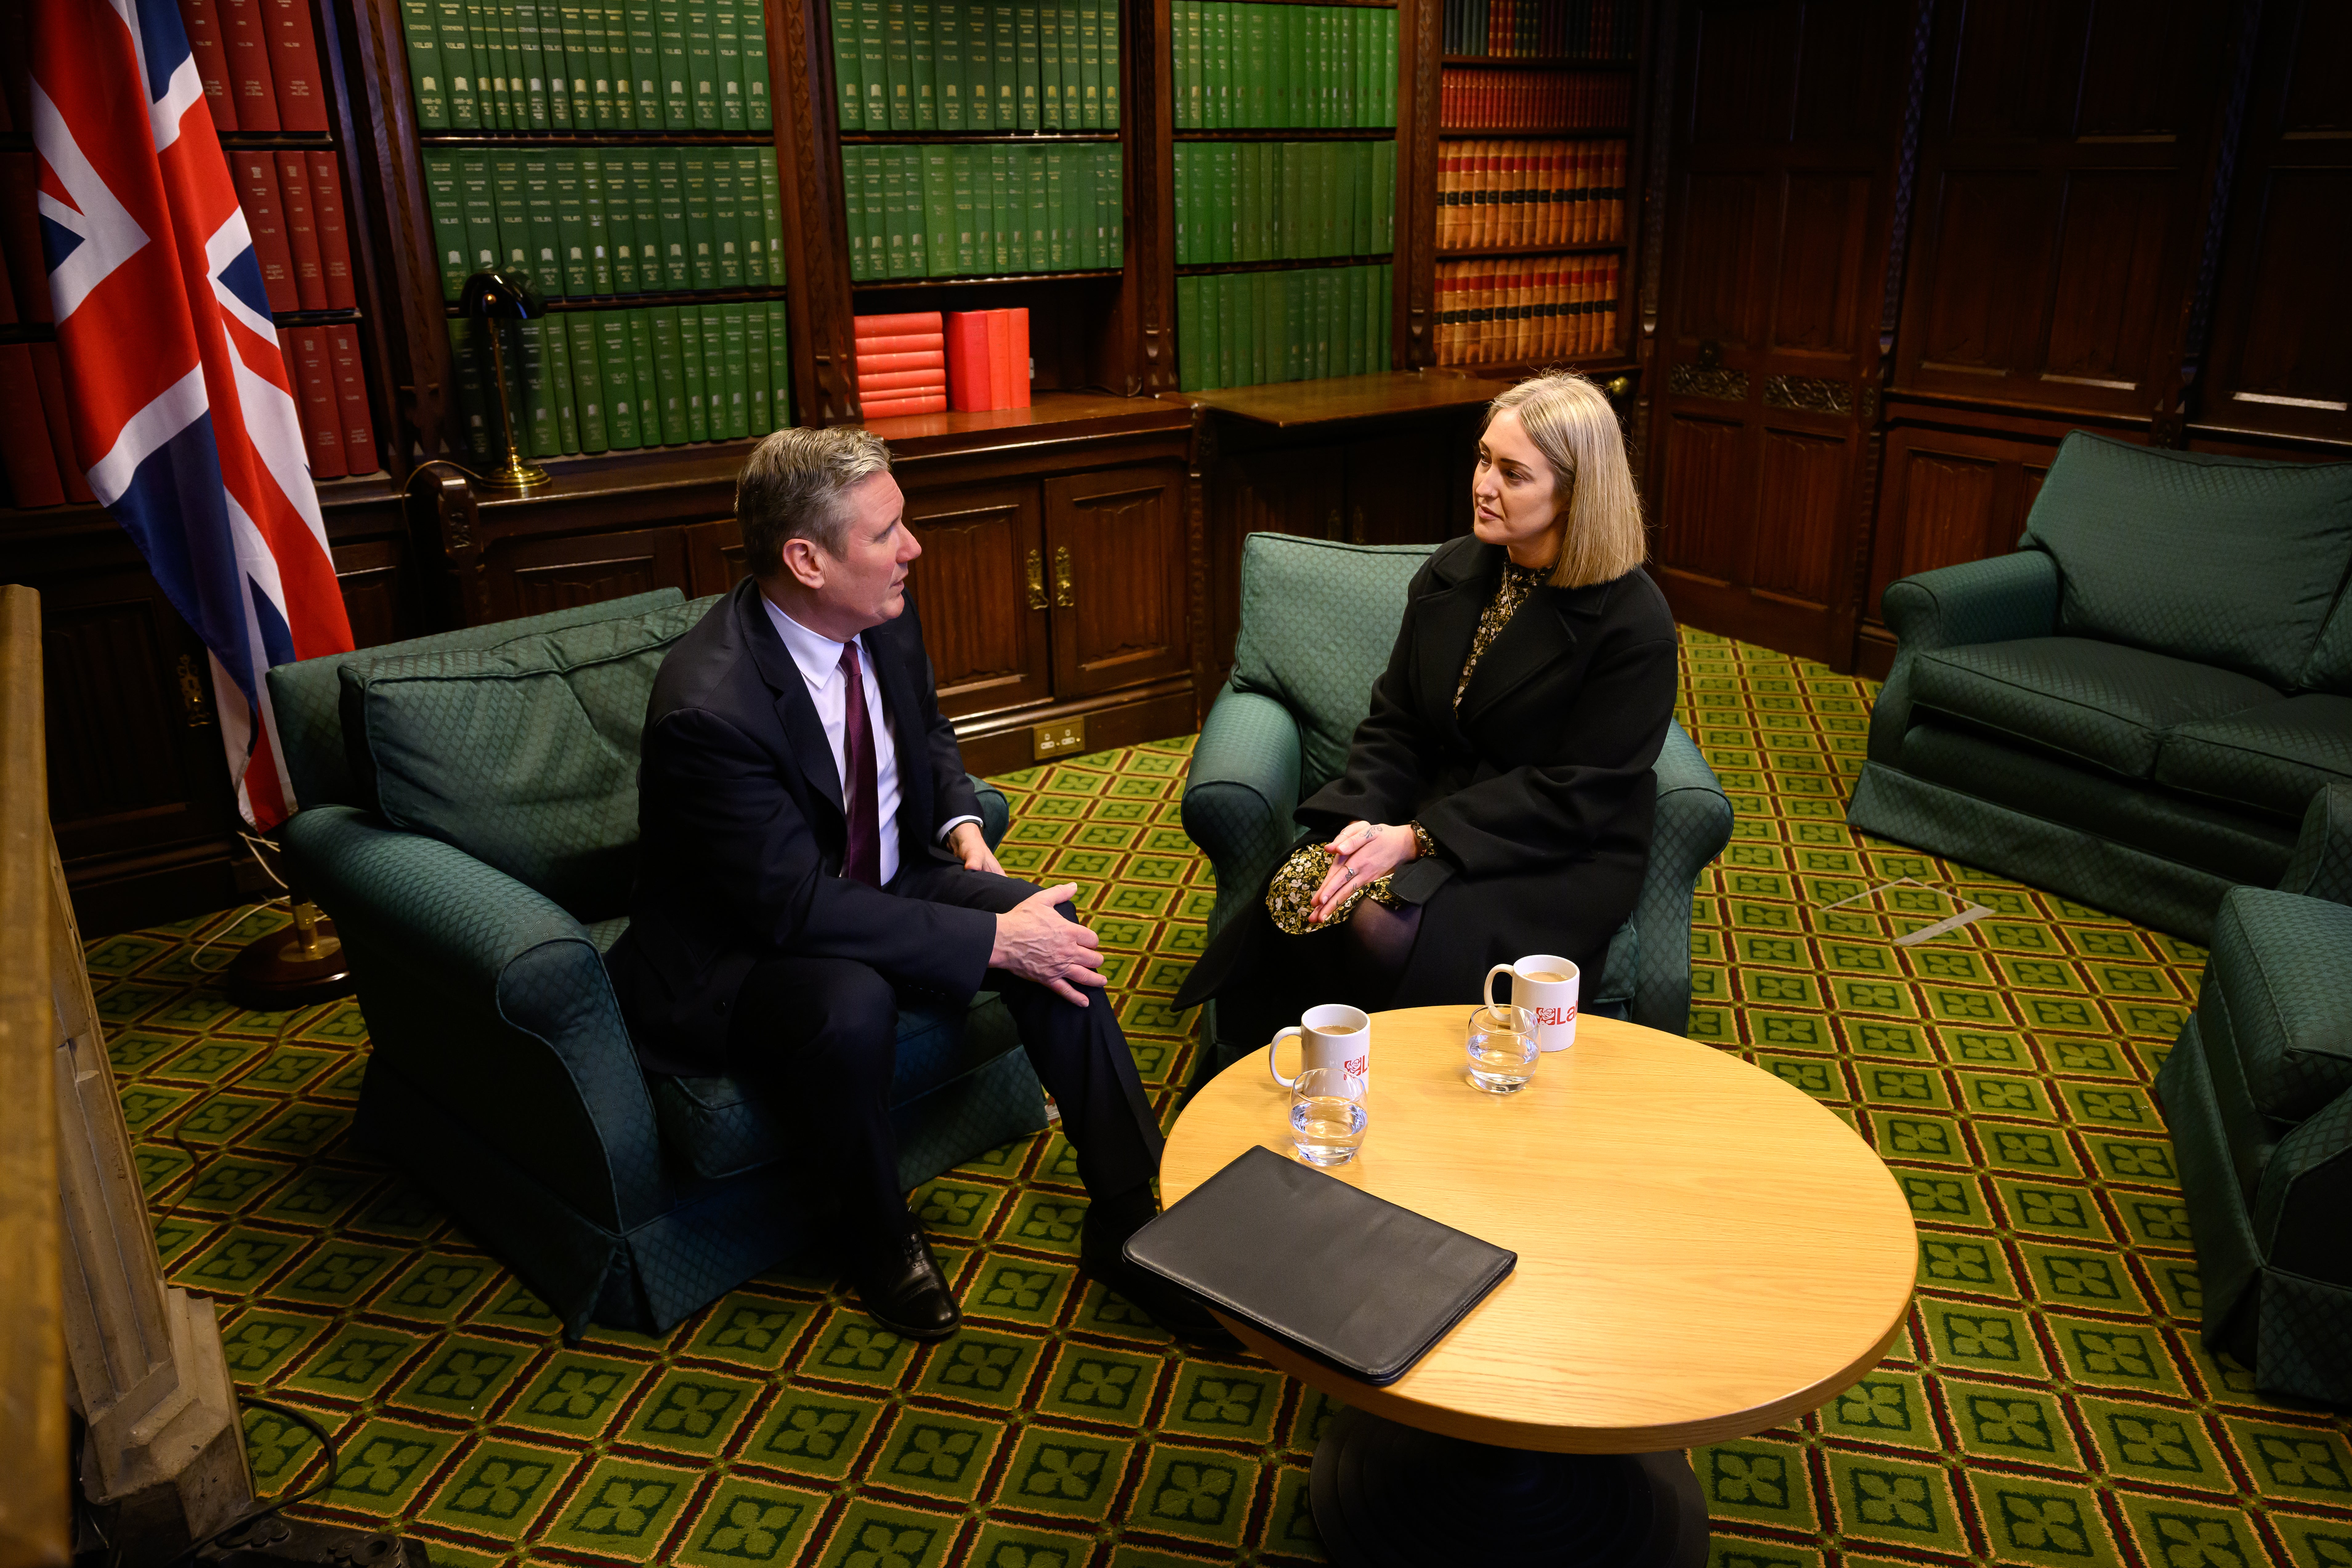 Esther Ghey met with Sir Keir Starmer in the commons on Wednesday